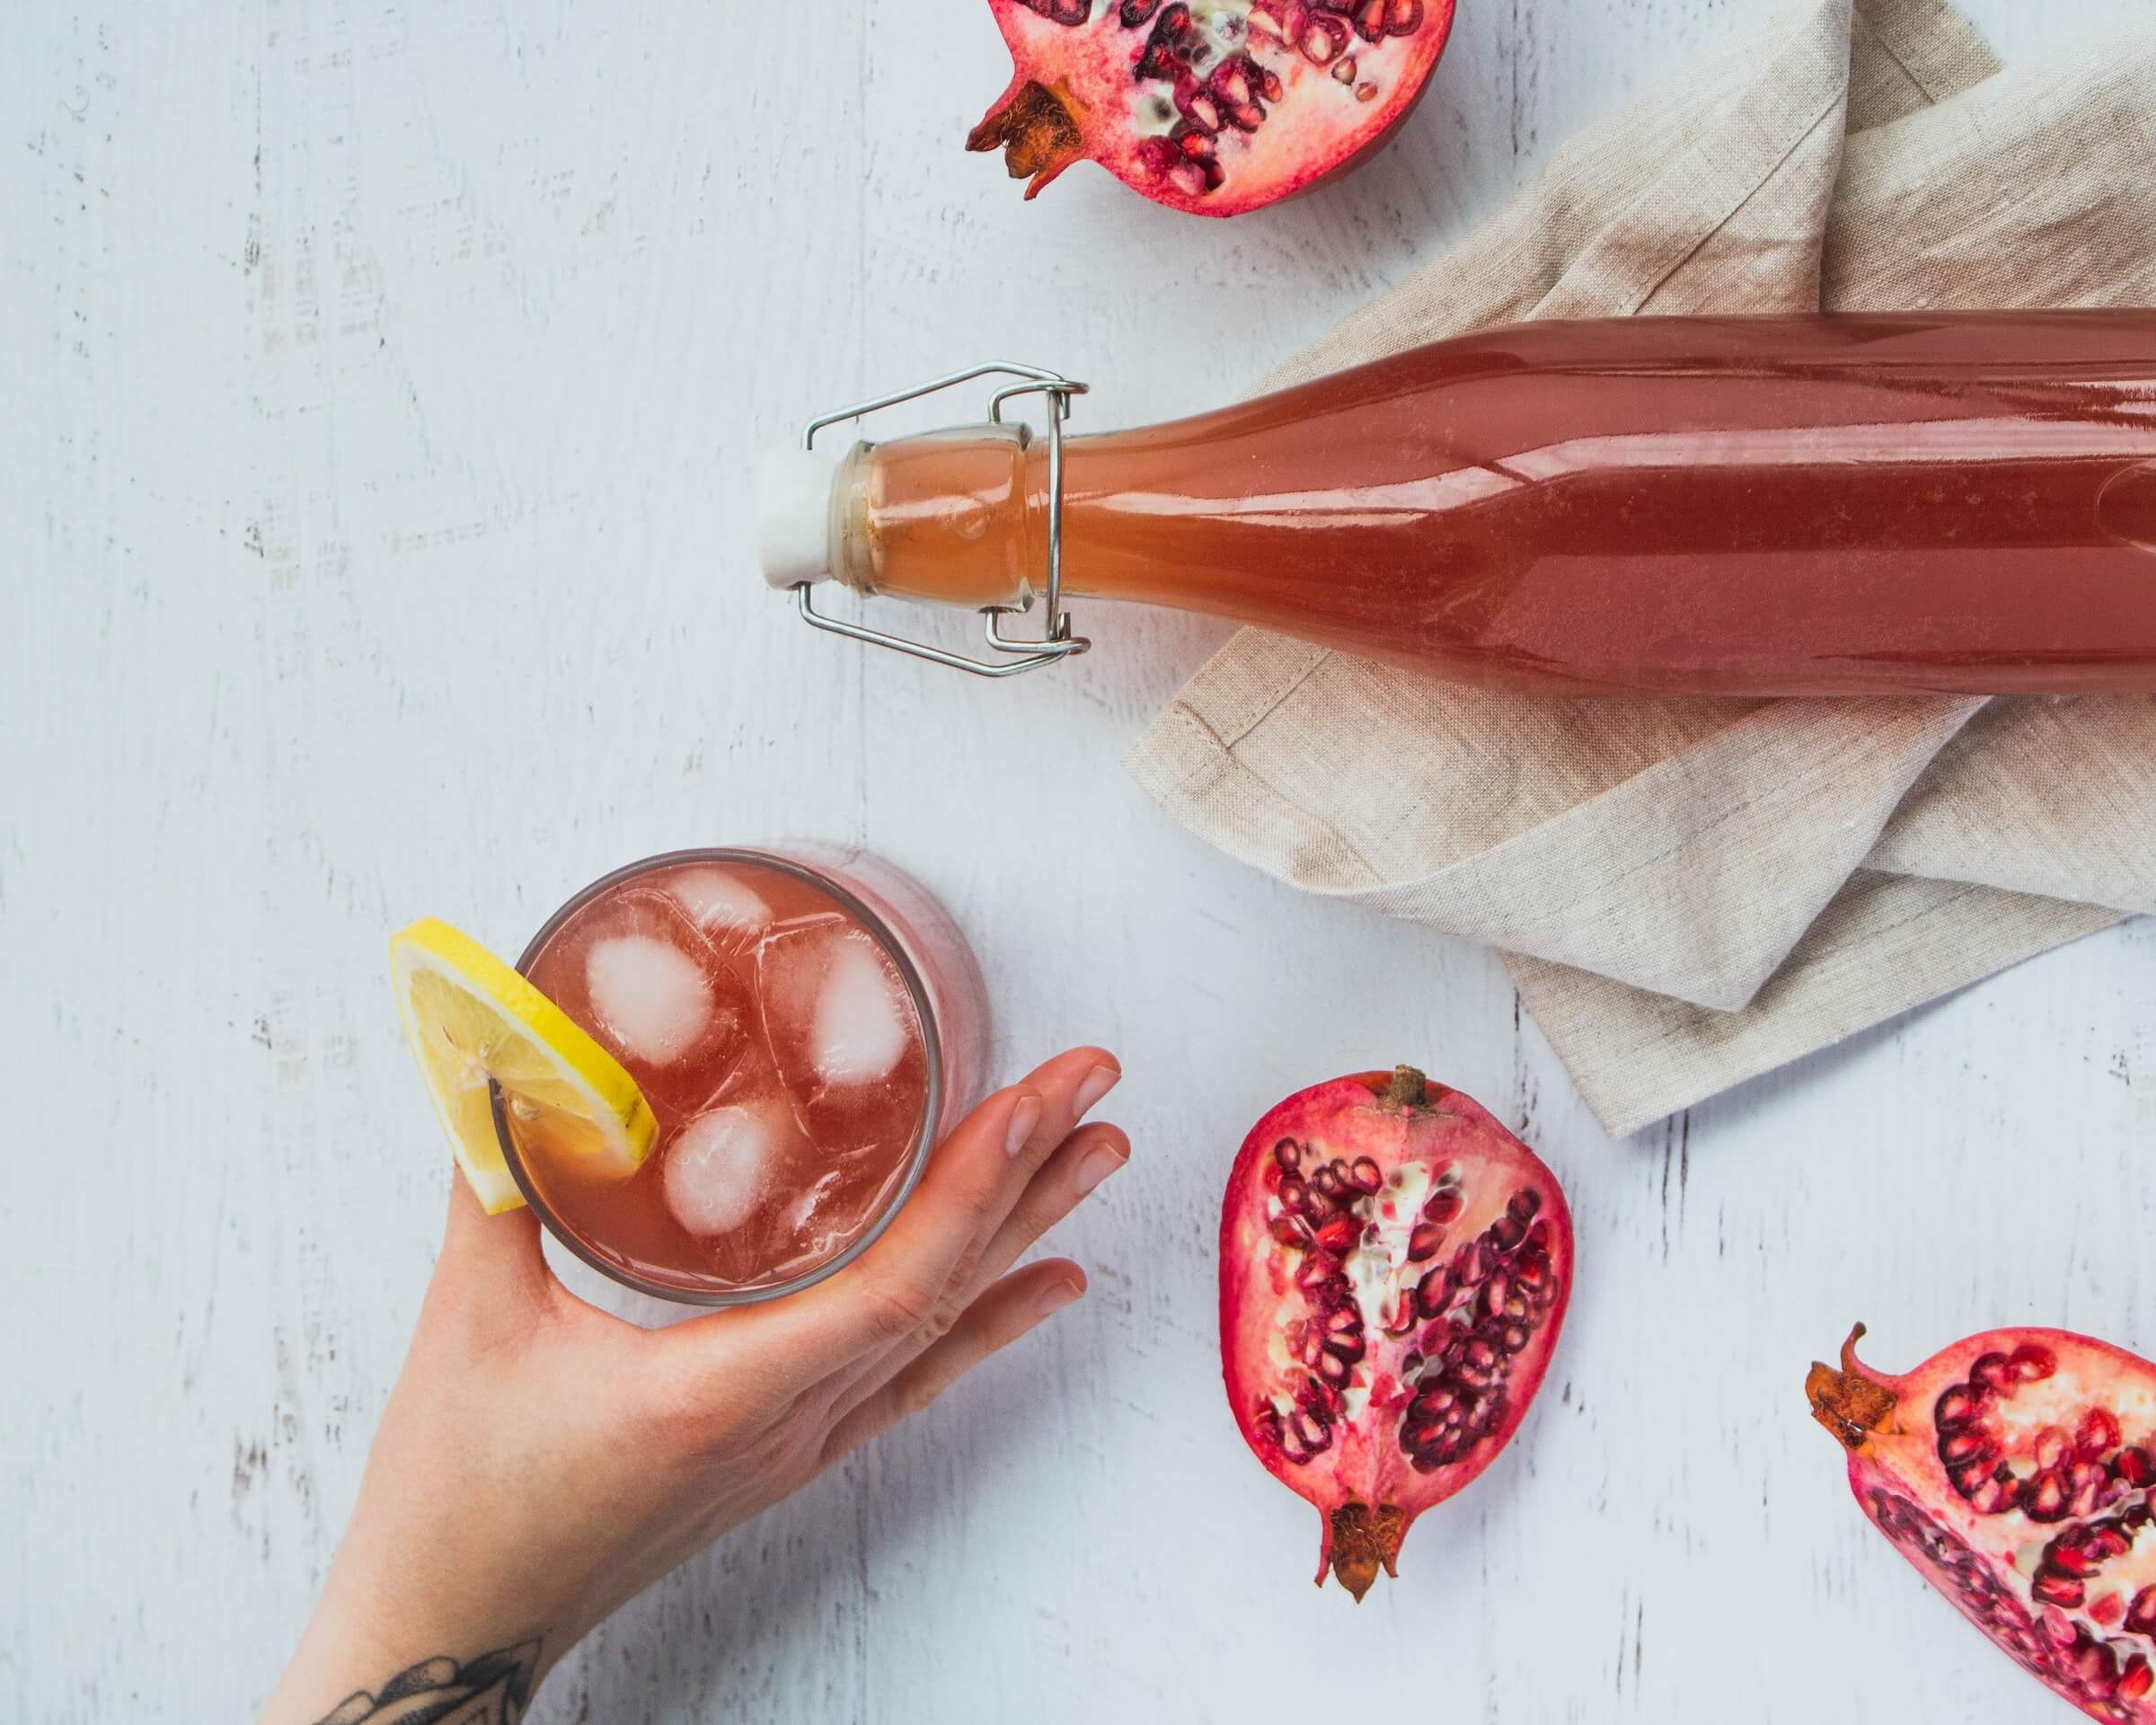 Do you know what kombucha is?